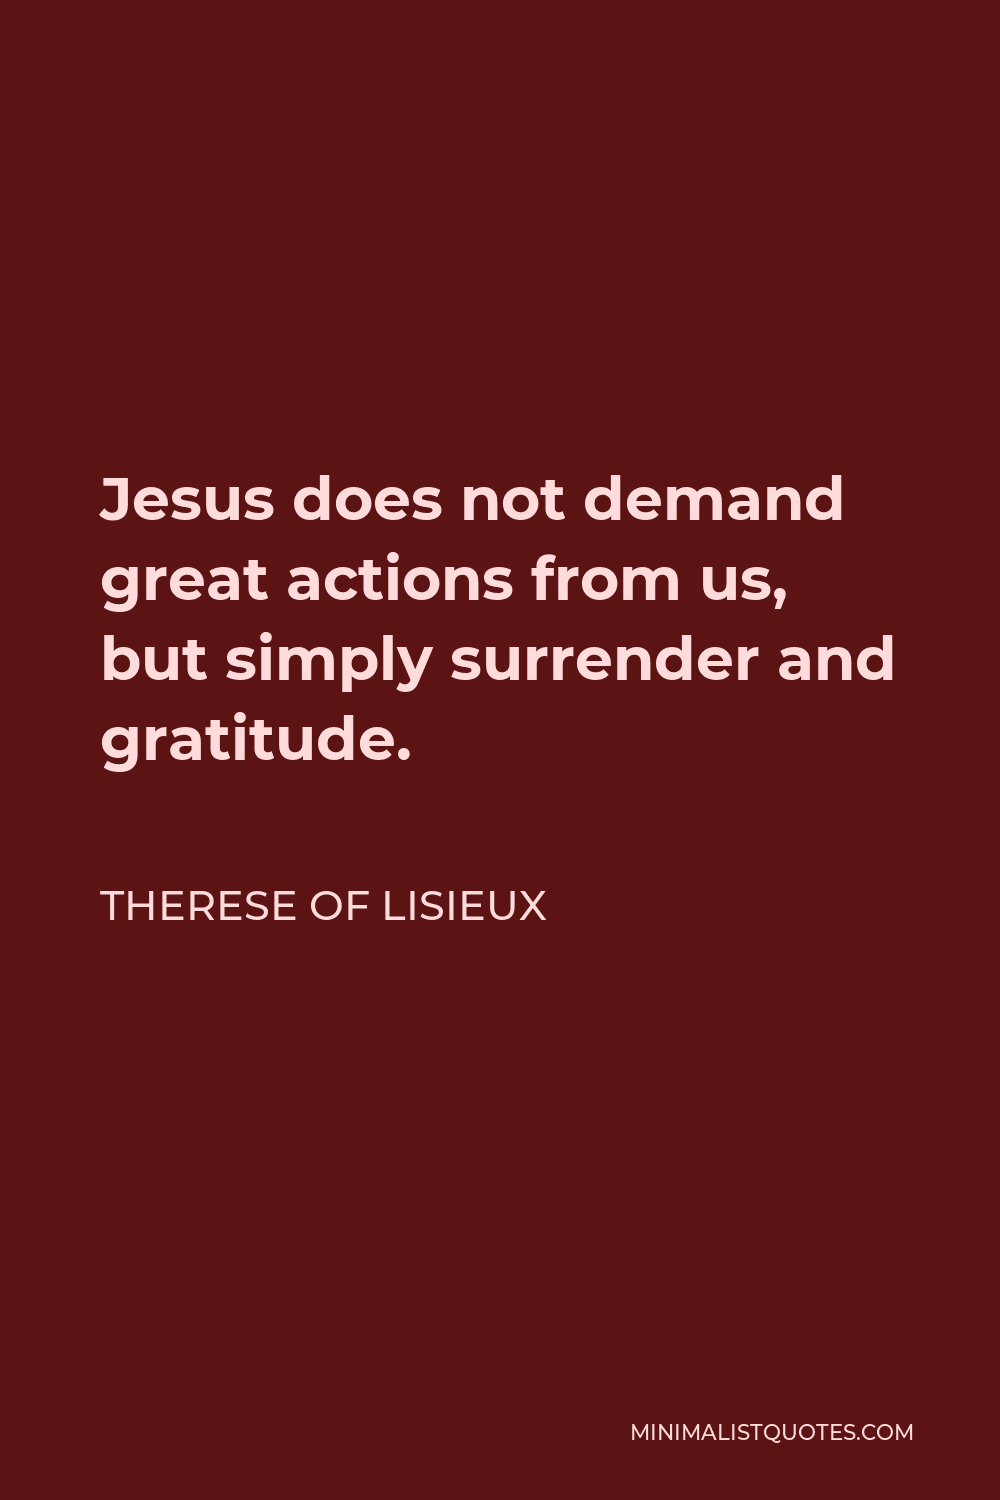 Therese of Lisieux Quote - Jesus does not demand great actions from us, but simply surrender and gratitude.